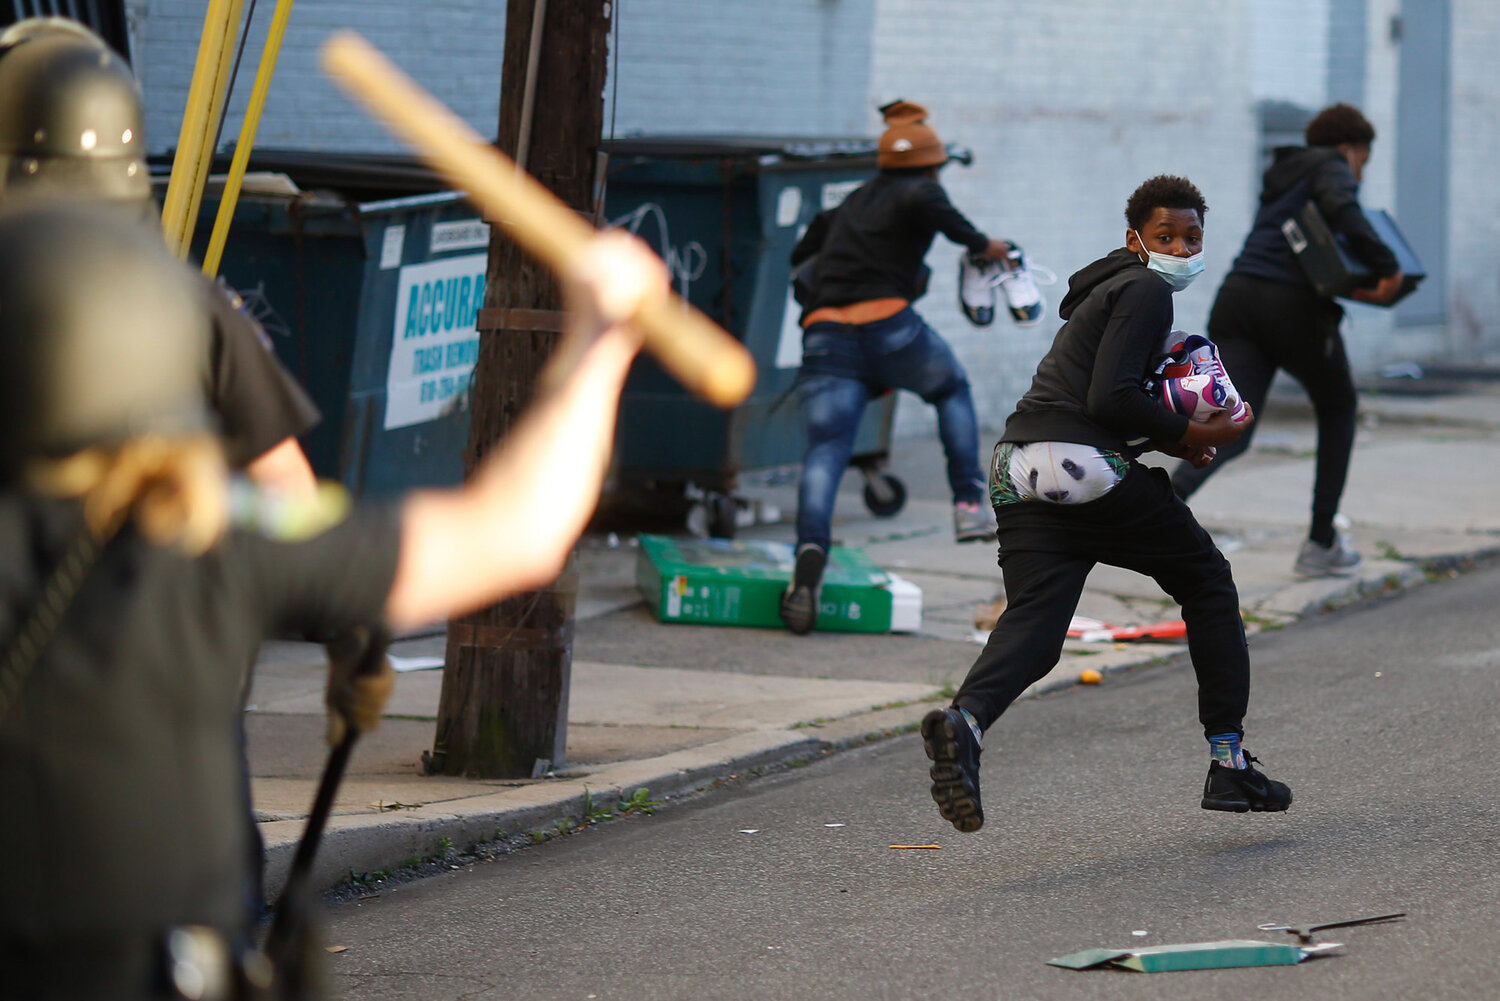  People flee from police officers after running out the back of a store carrying shoes in Upper Darby, Pa., on May 31, 2020, following protests over the death of George Floyd, a Black man who was killed by a police officer in Minneapolis on May 25. (AP Photo/Matt Slocum) 